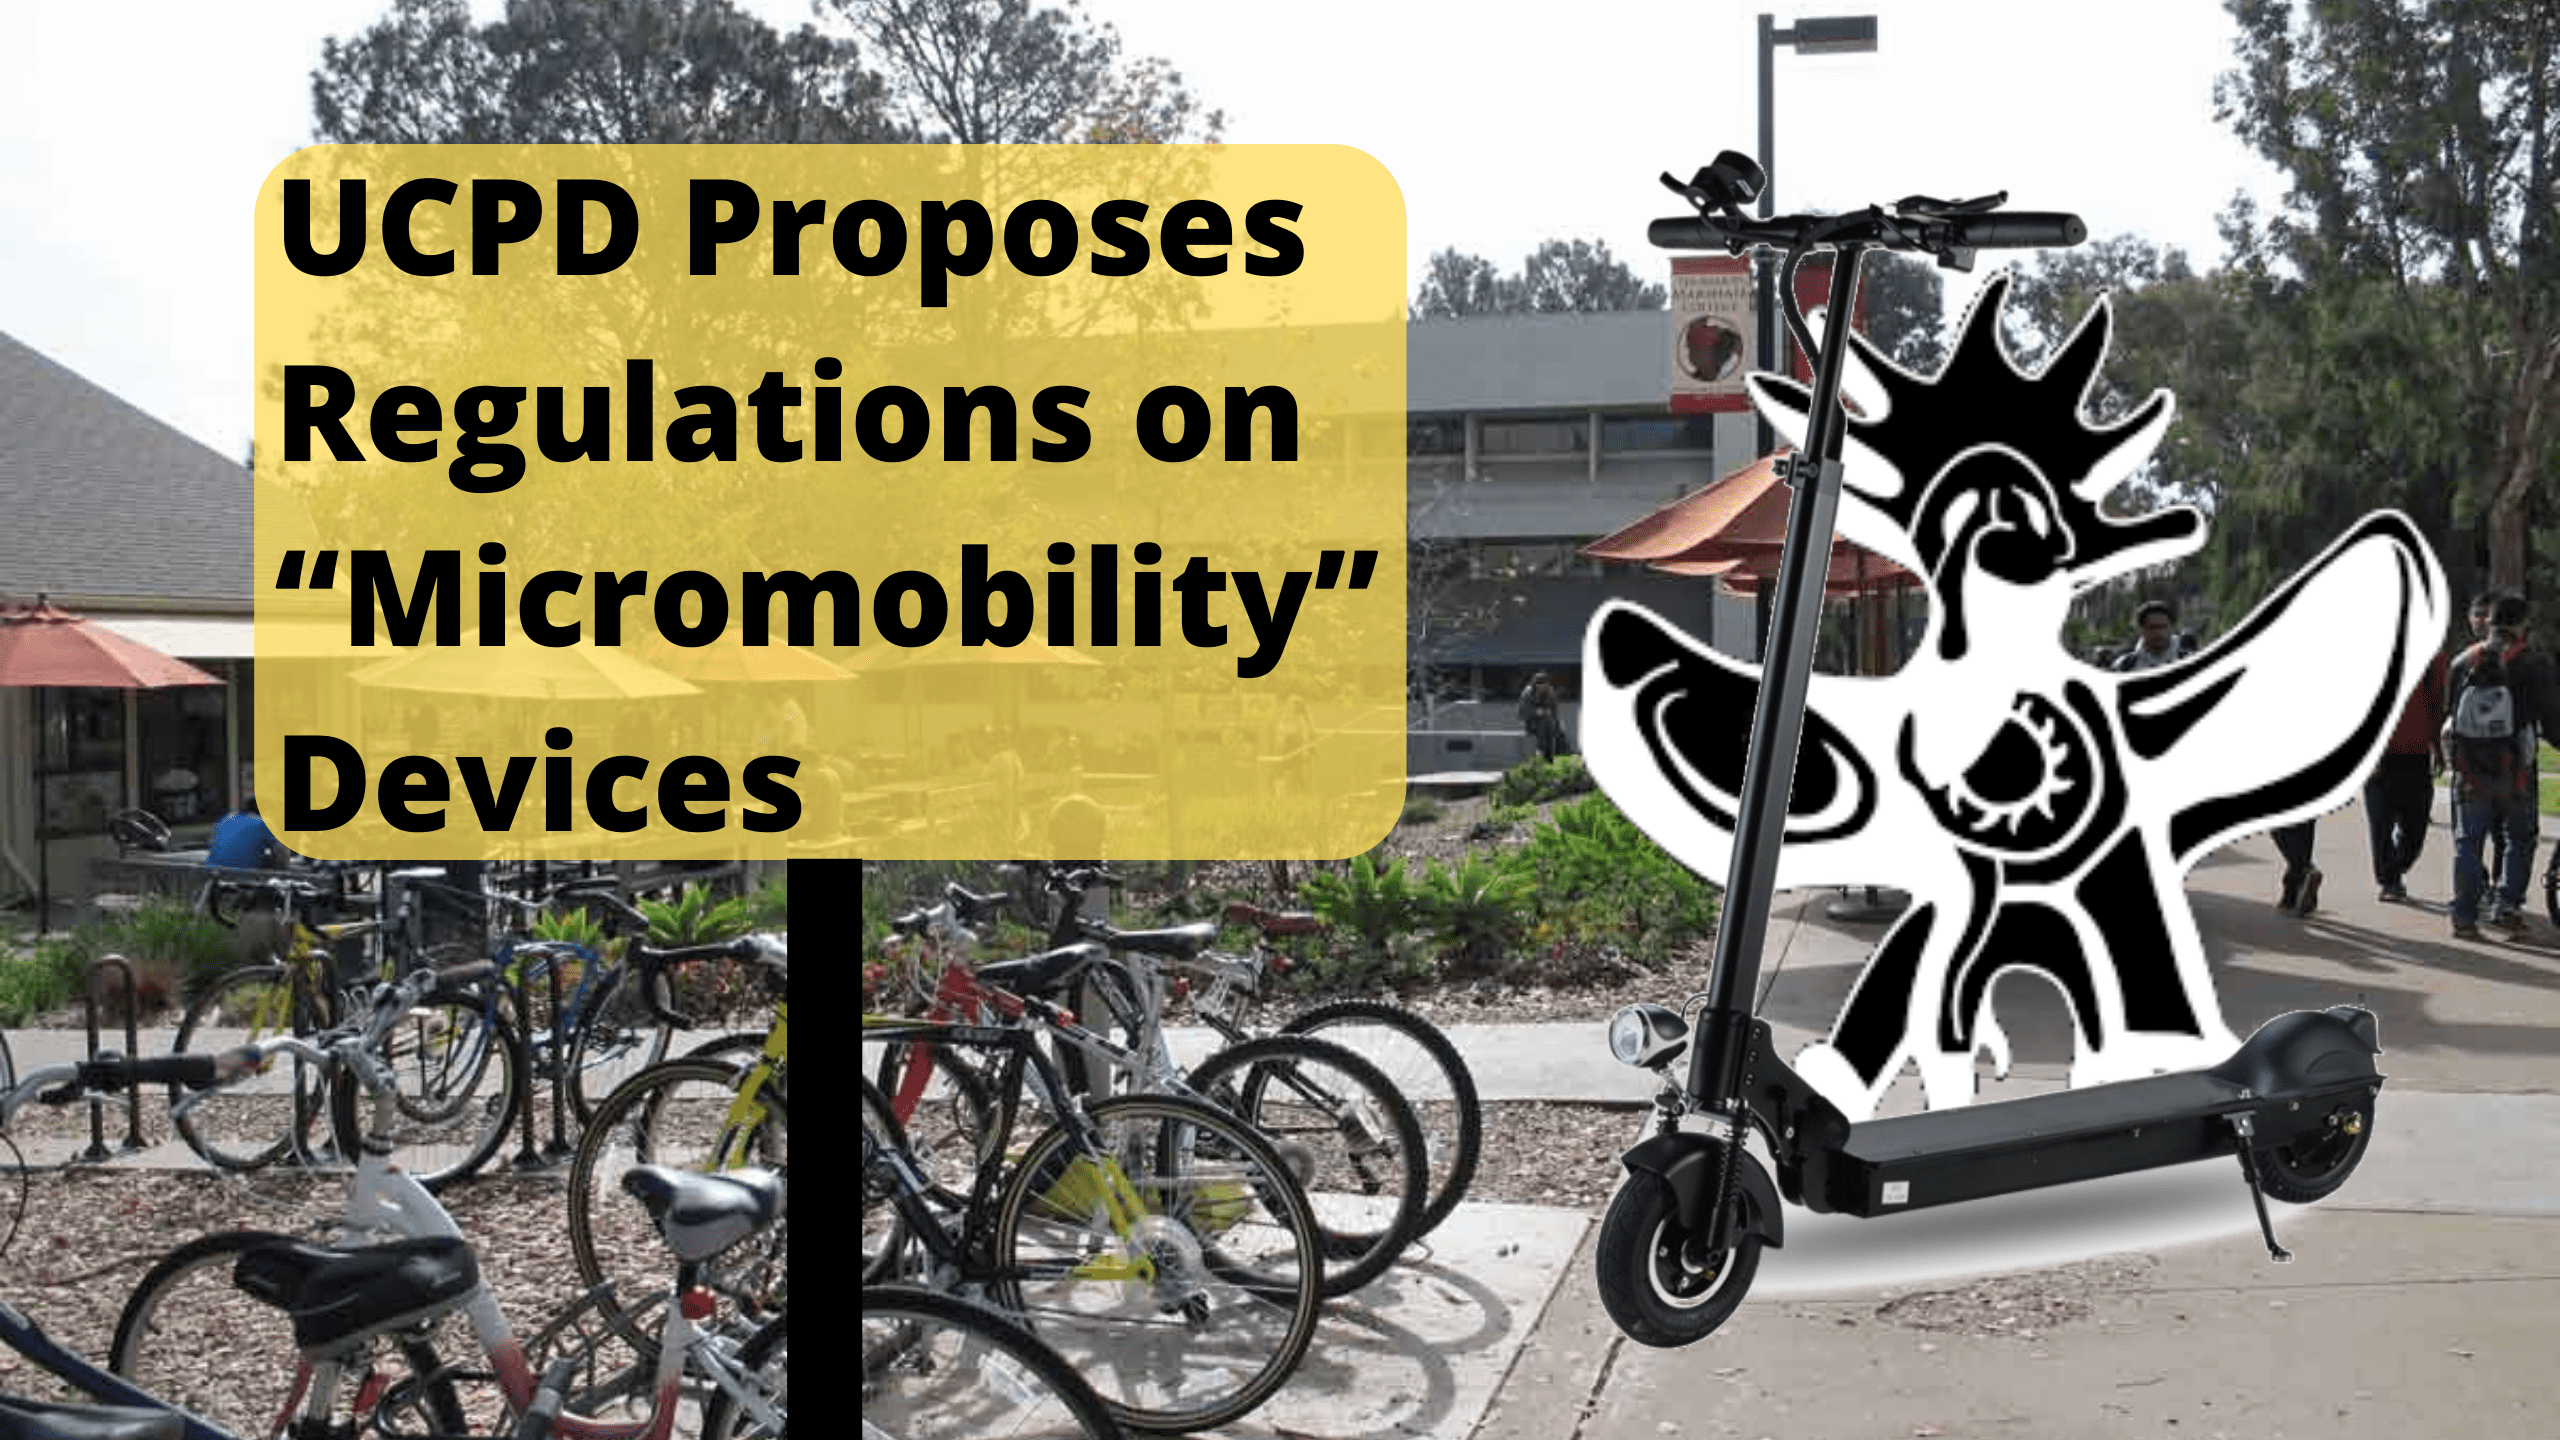 UCPD Proposes Regulations on “Micromobility” Devices